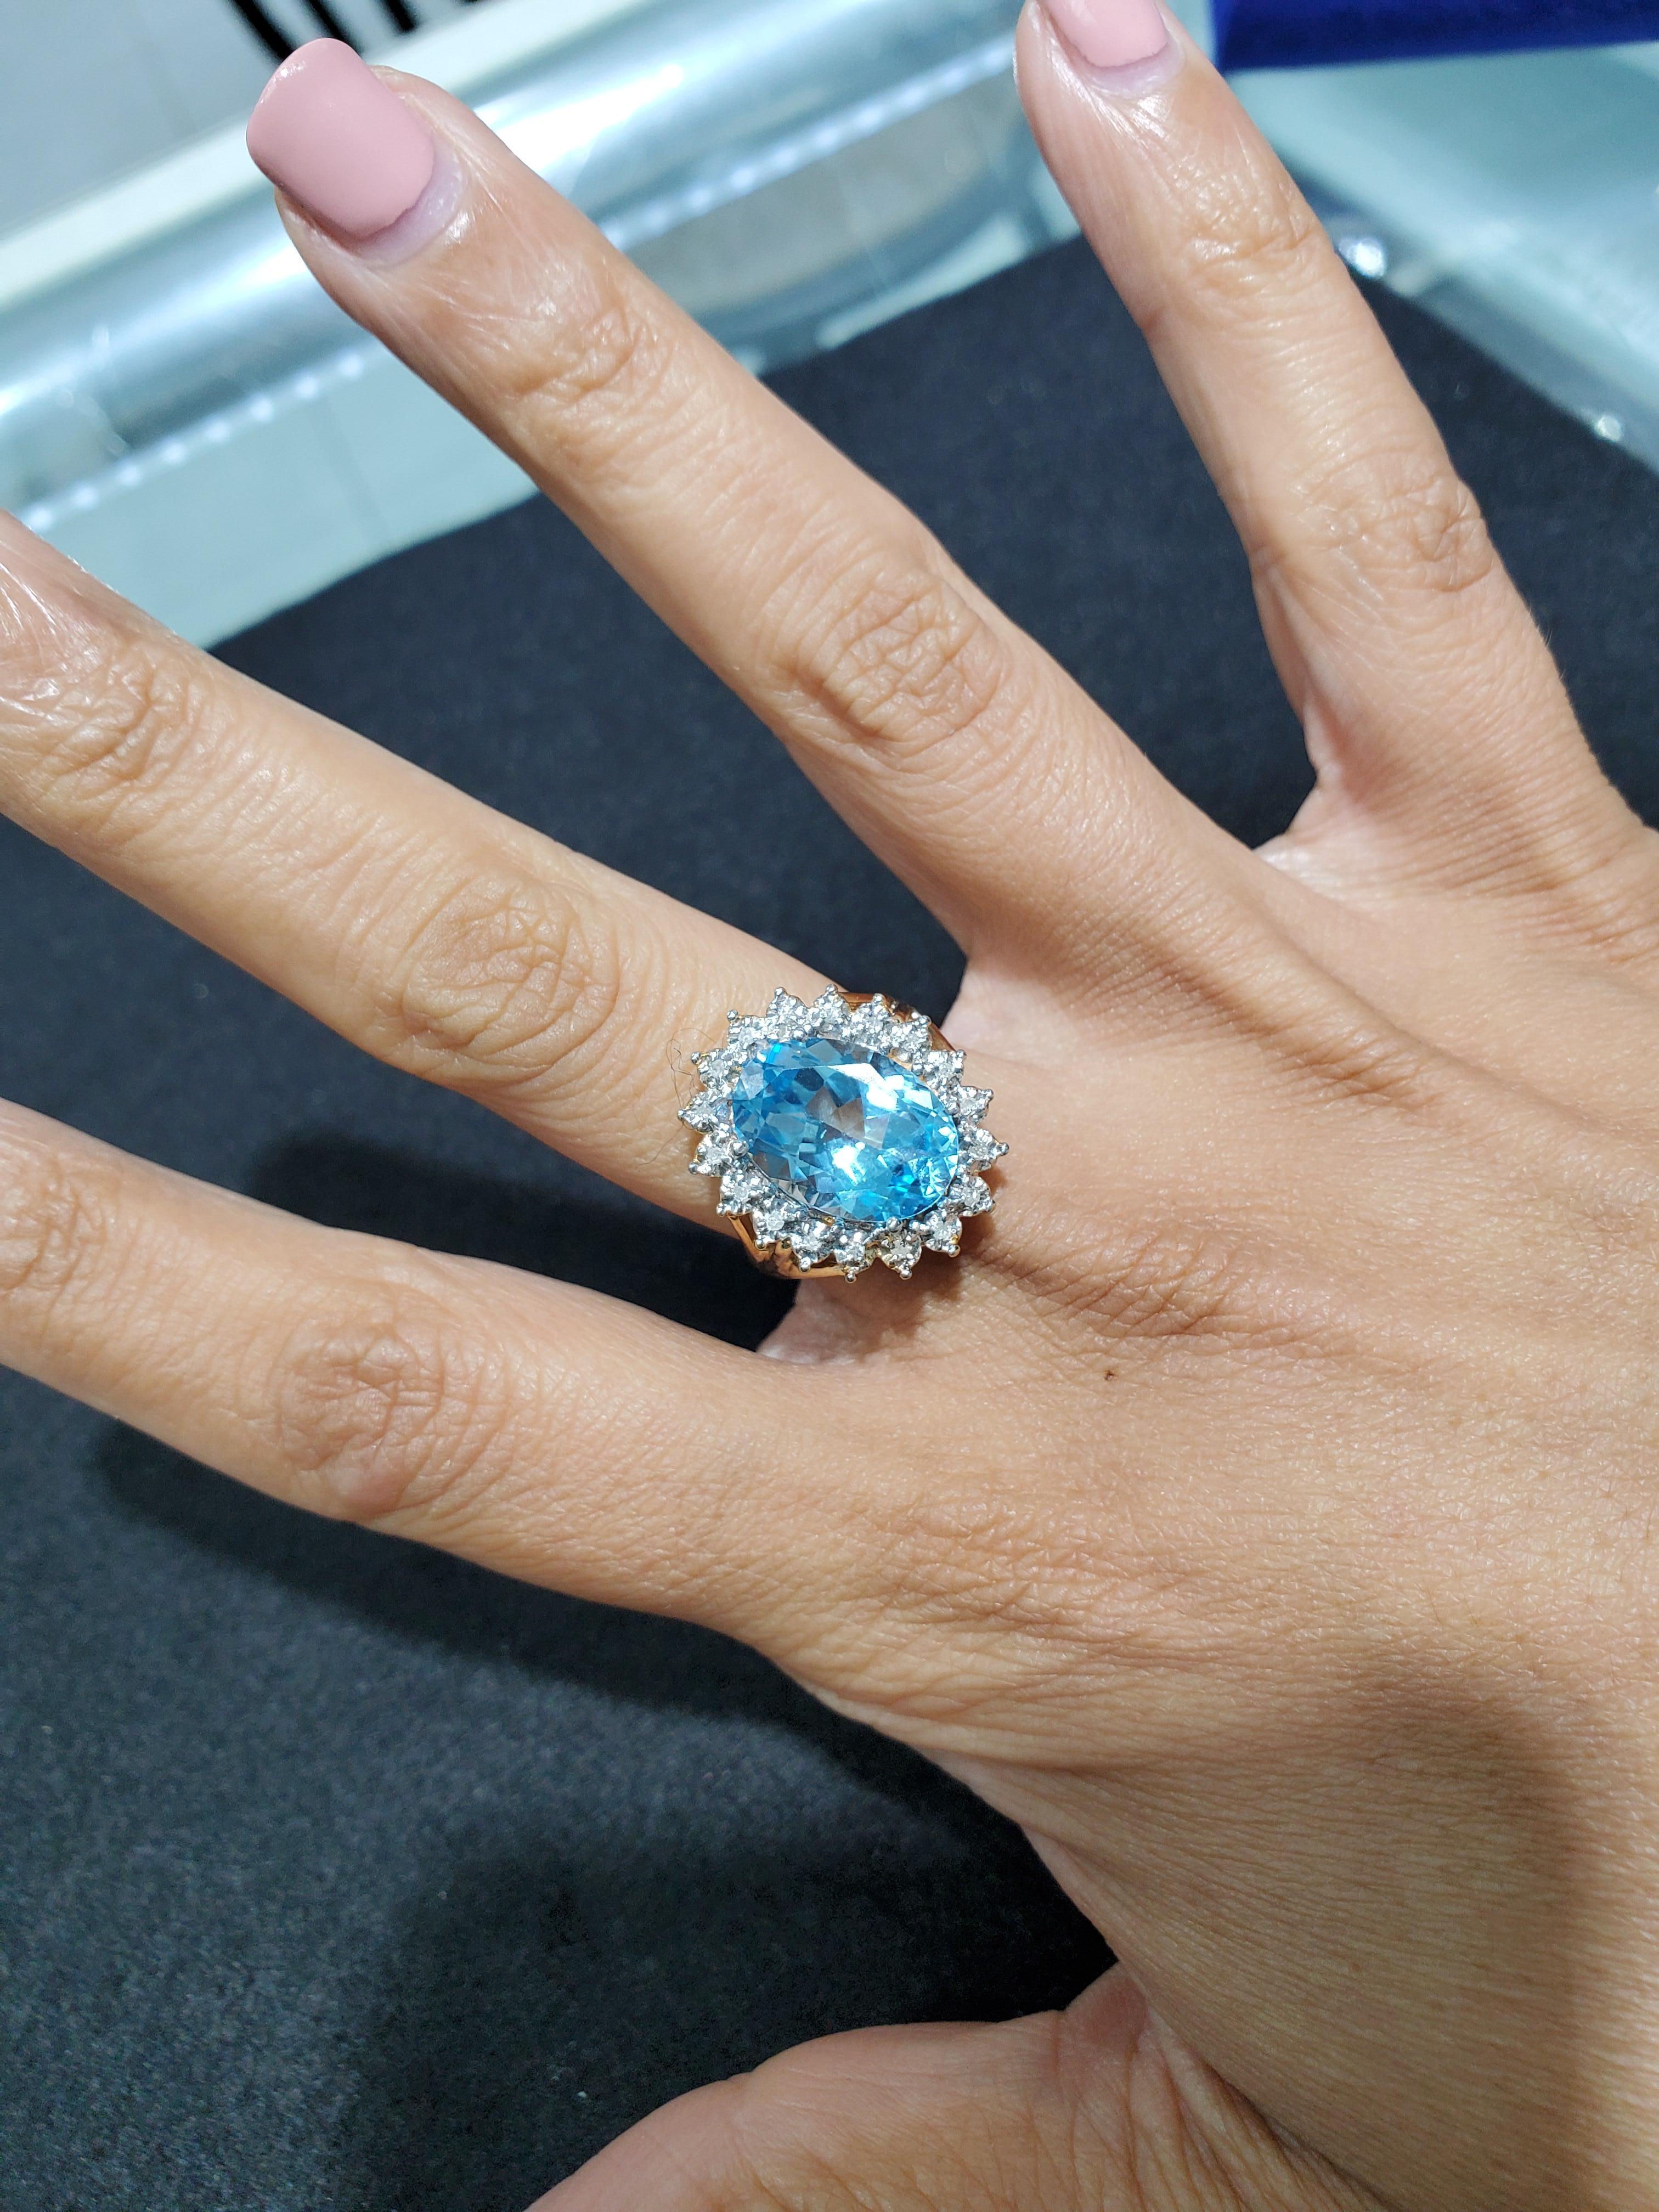 Oval Cut Seven Carat Blue Topaz Diamond Halo Engagement Ring For Sale